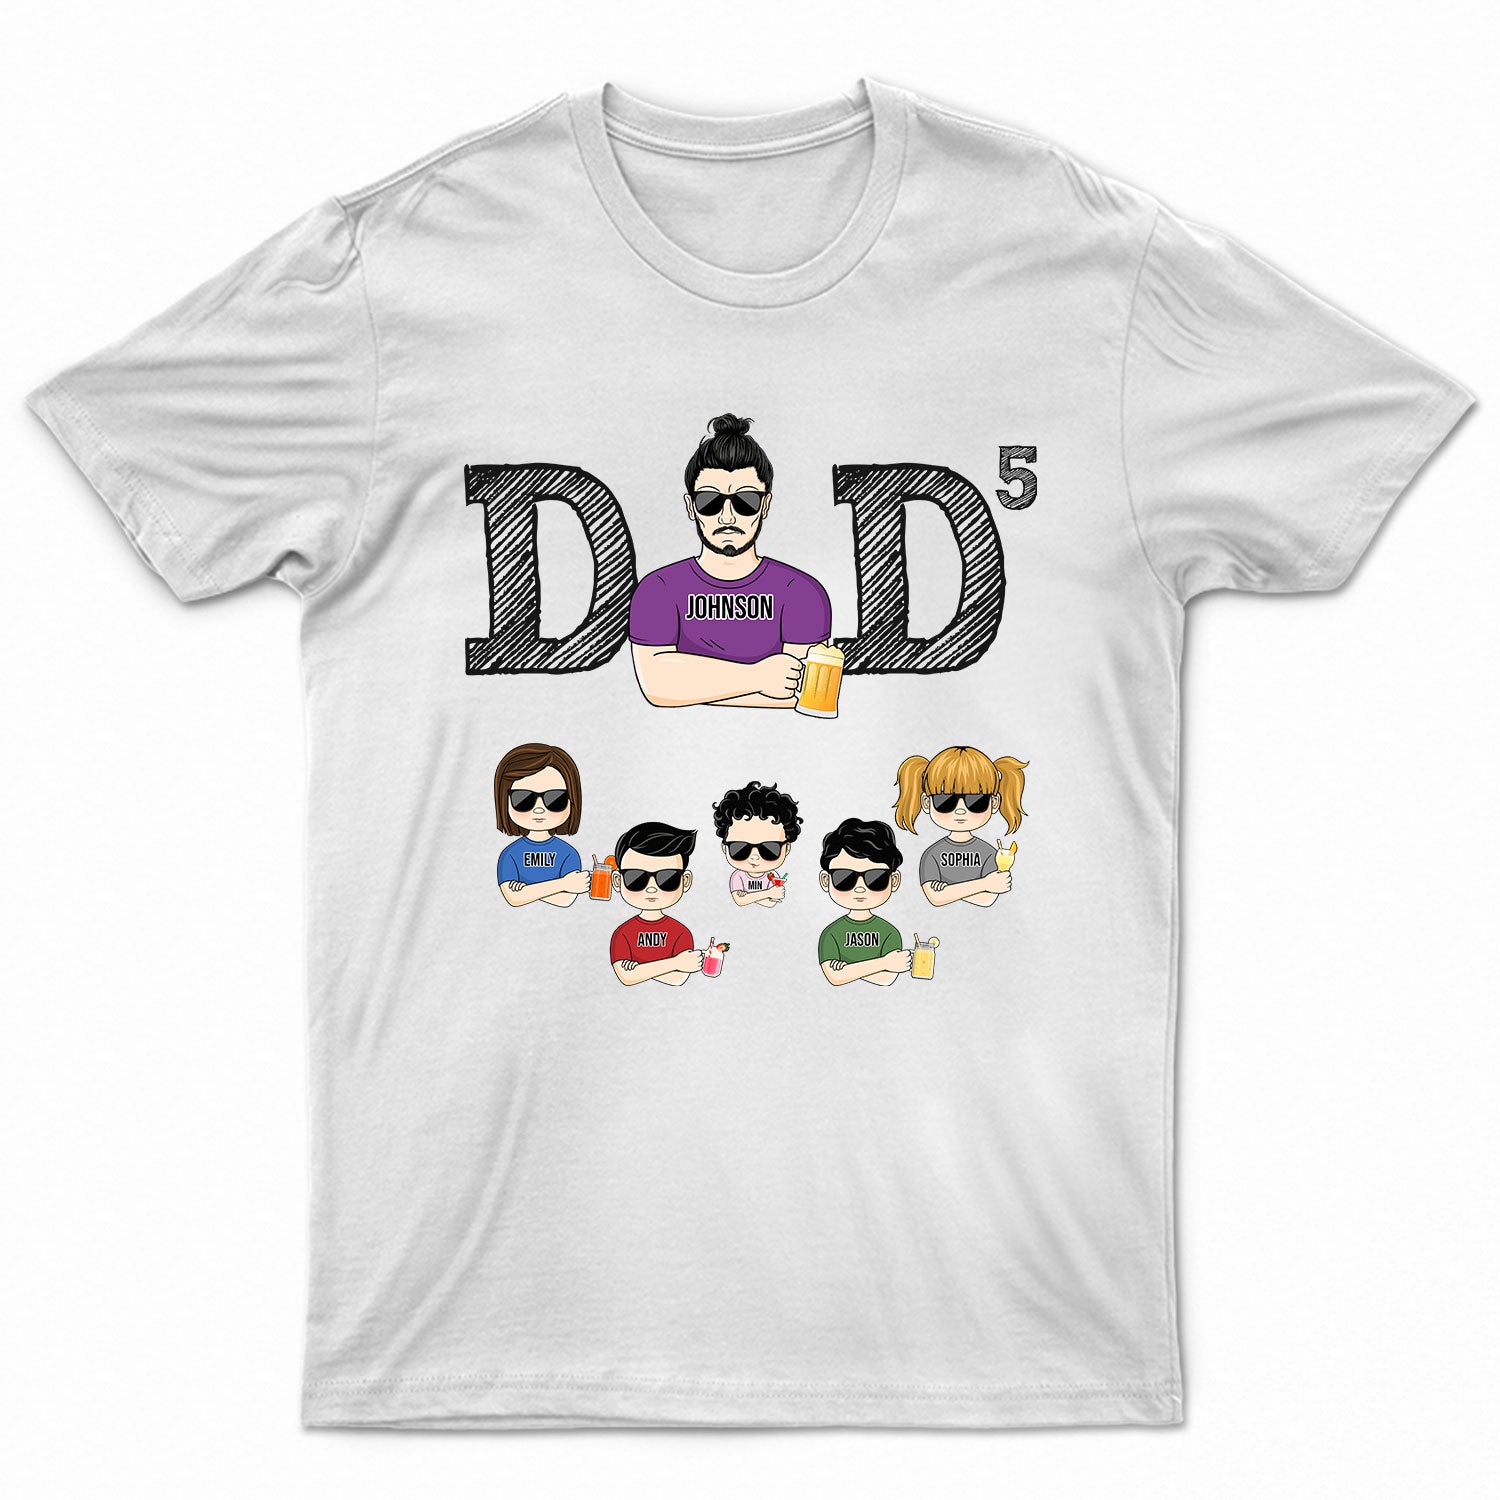 Dad And His Kids - Birthday, Loving Gift For Daddy, Father, Grandpa, Grandfather, Husband, Daughters, Sons - Personalized Custom T Shirt